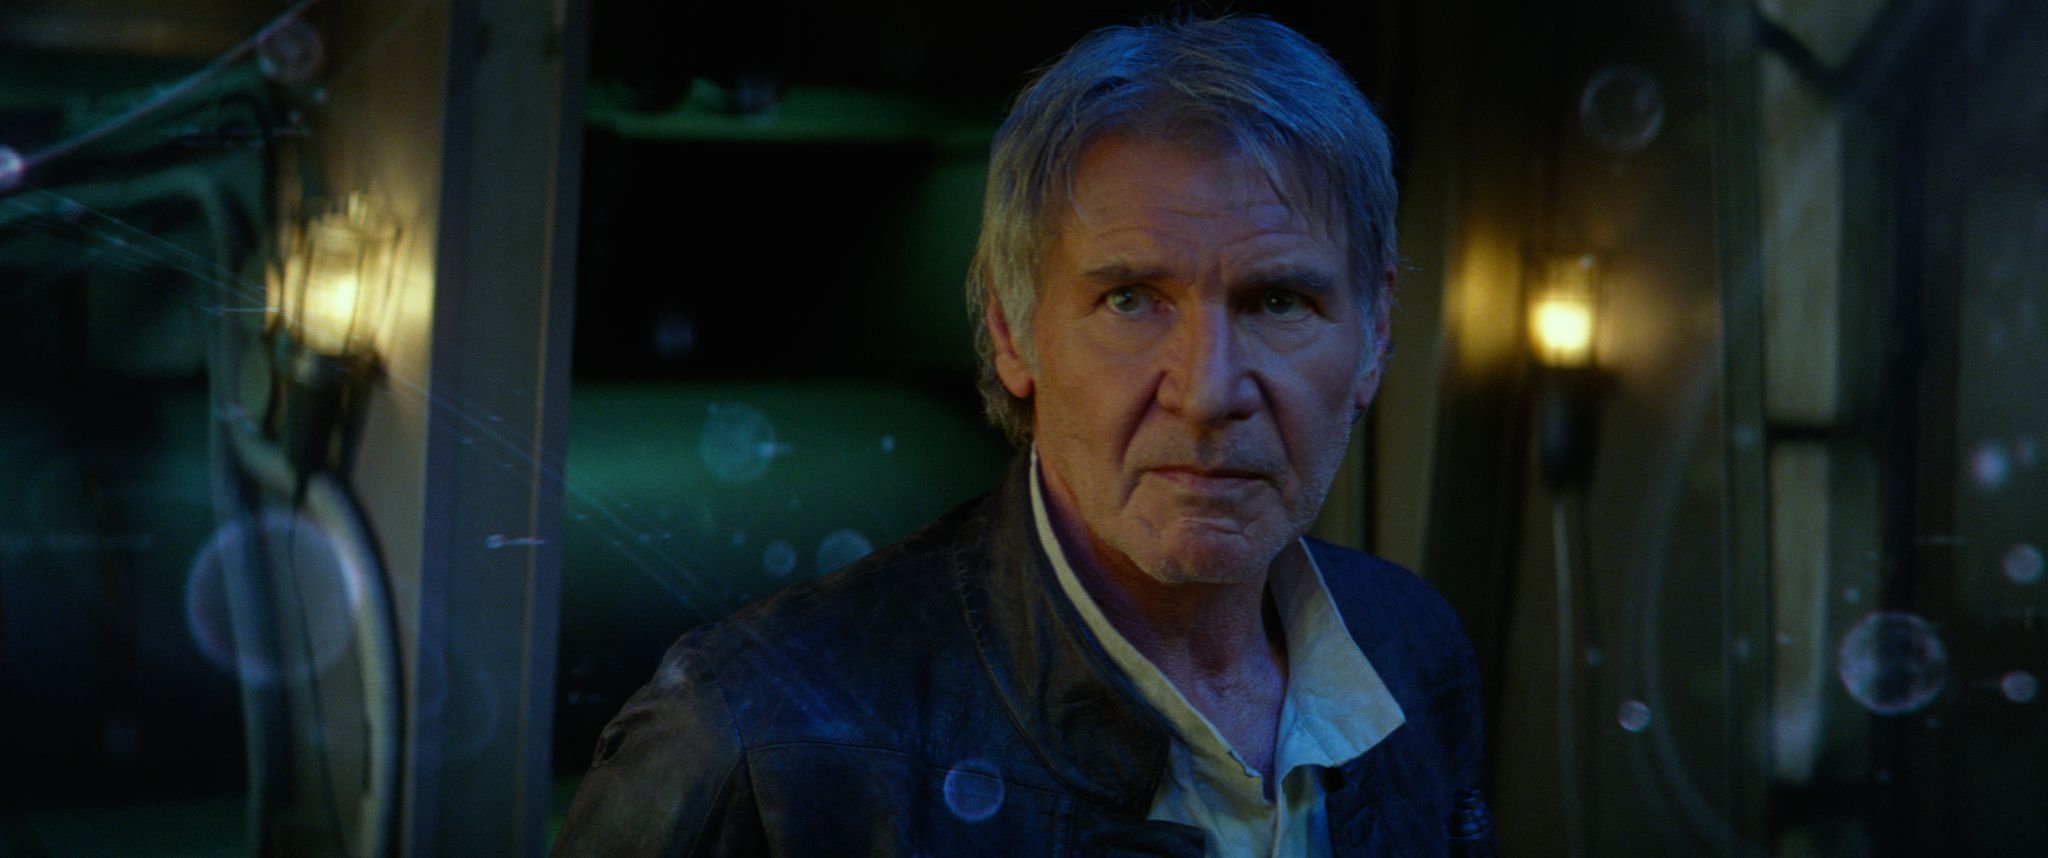 Han Solo Star Wars: The Force Awakens